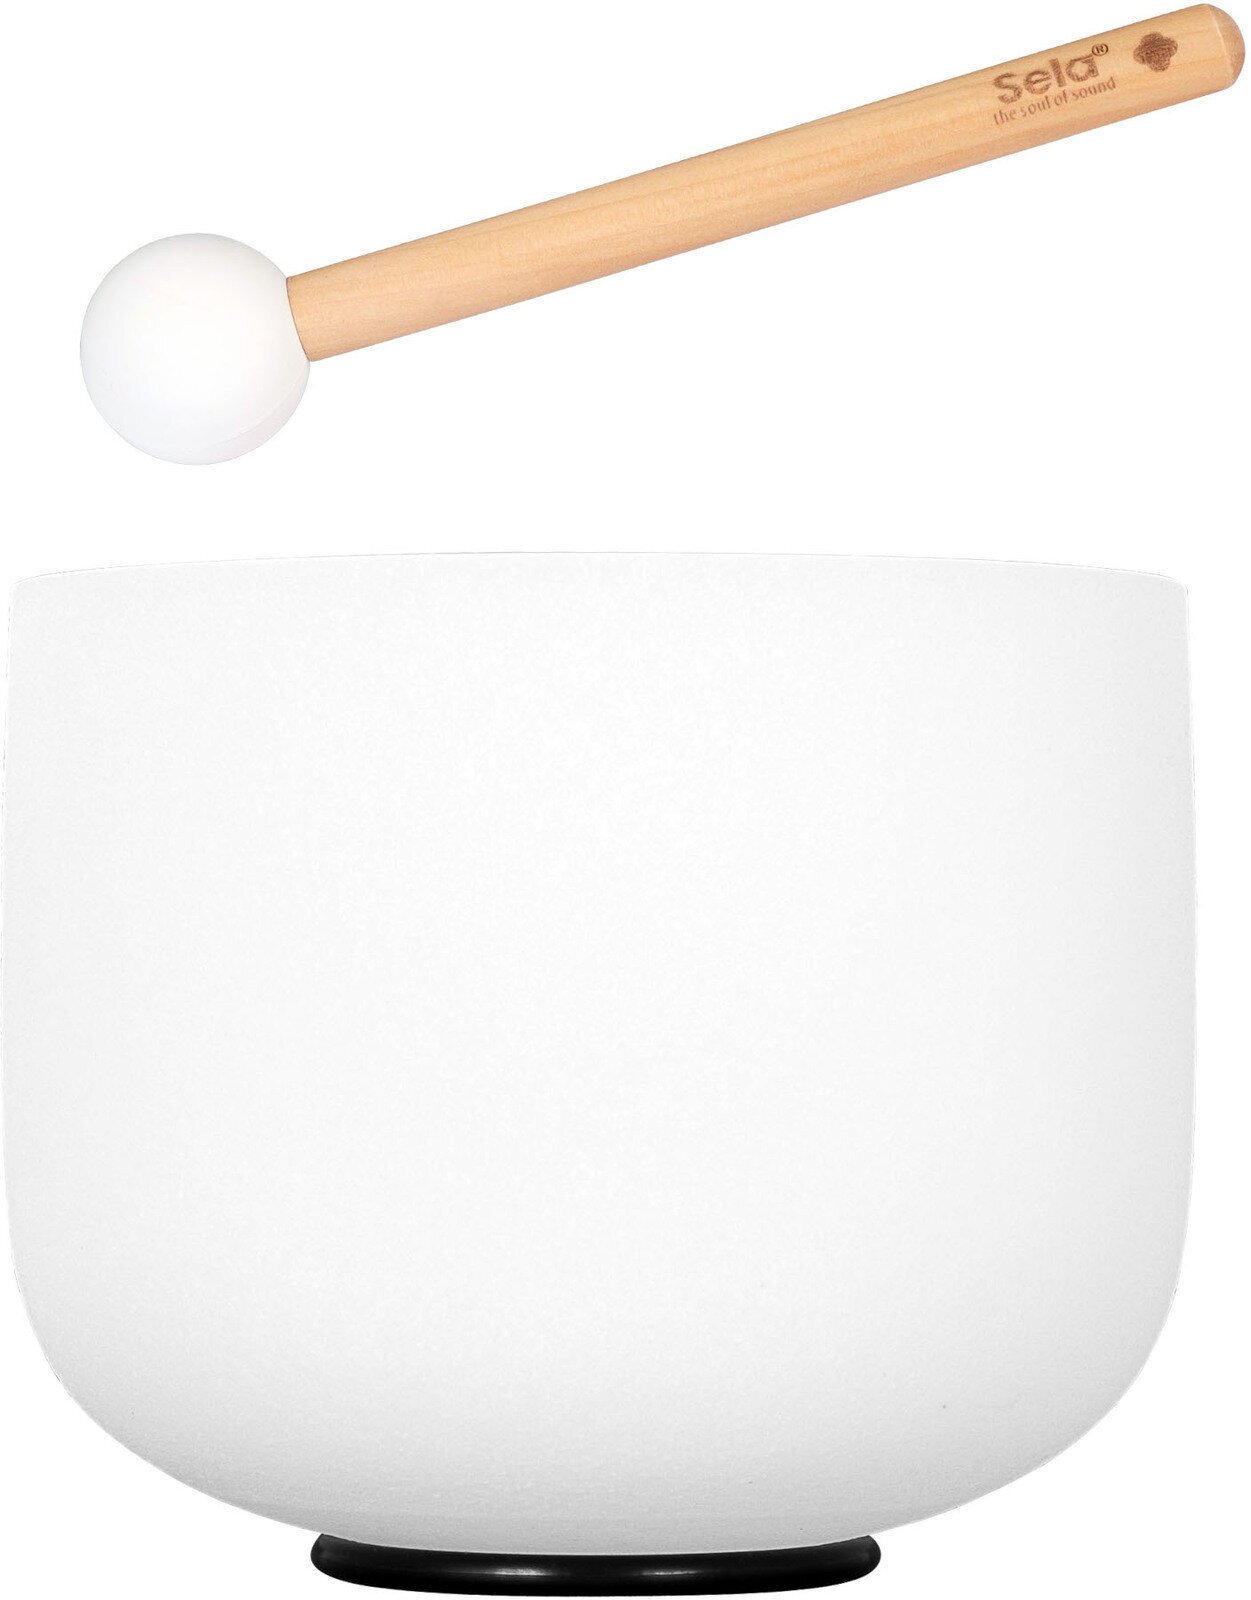 Percussions musicothérapeutiques Sela 8" Crystal Singing Bowl Frosted 440 Hz G incl. 1 Wood Mallet